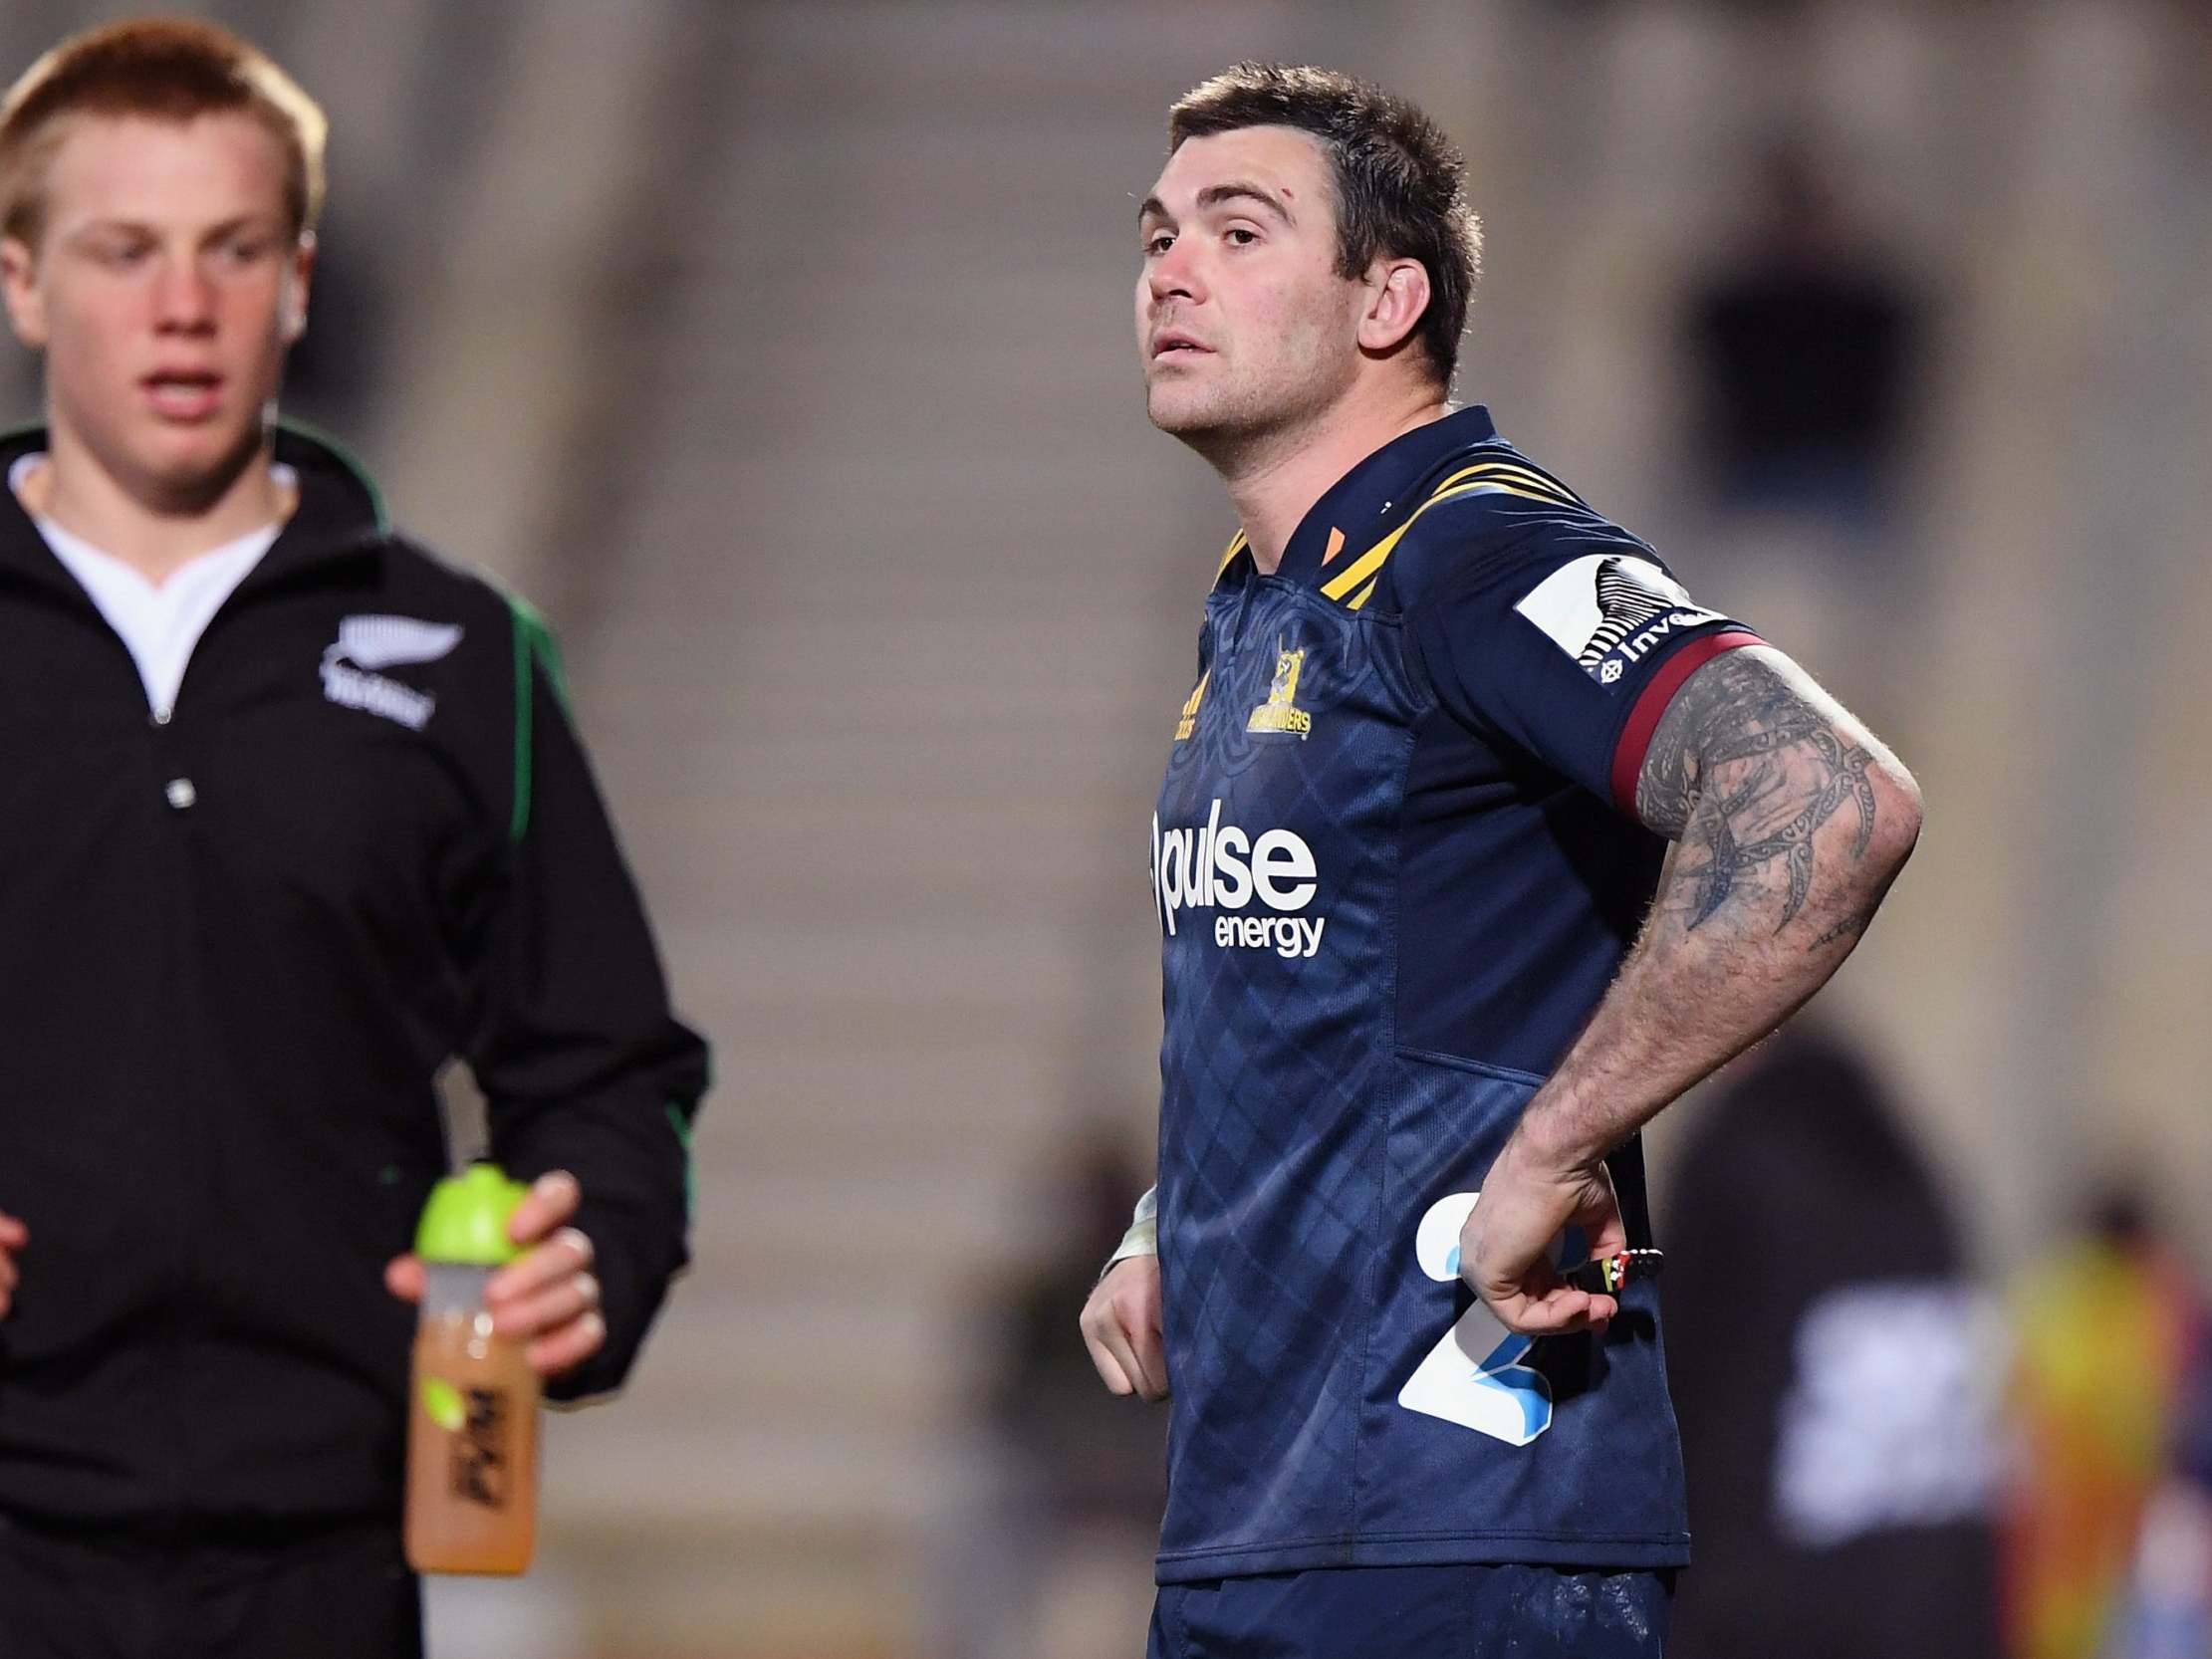 Highlanders flanker Liam Squire ruled himself out of All Blacks selection